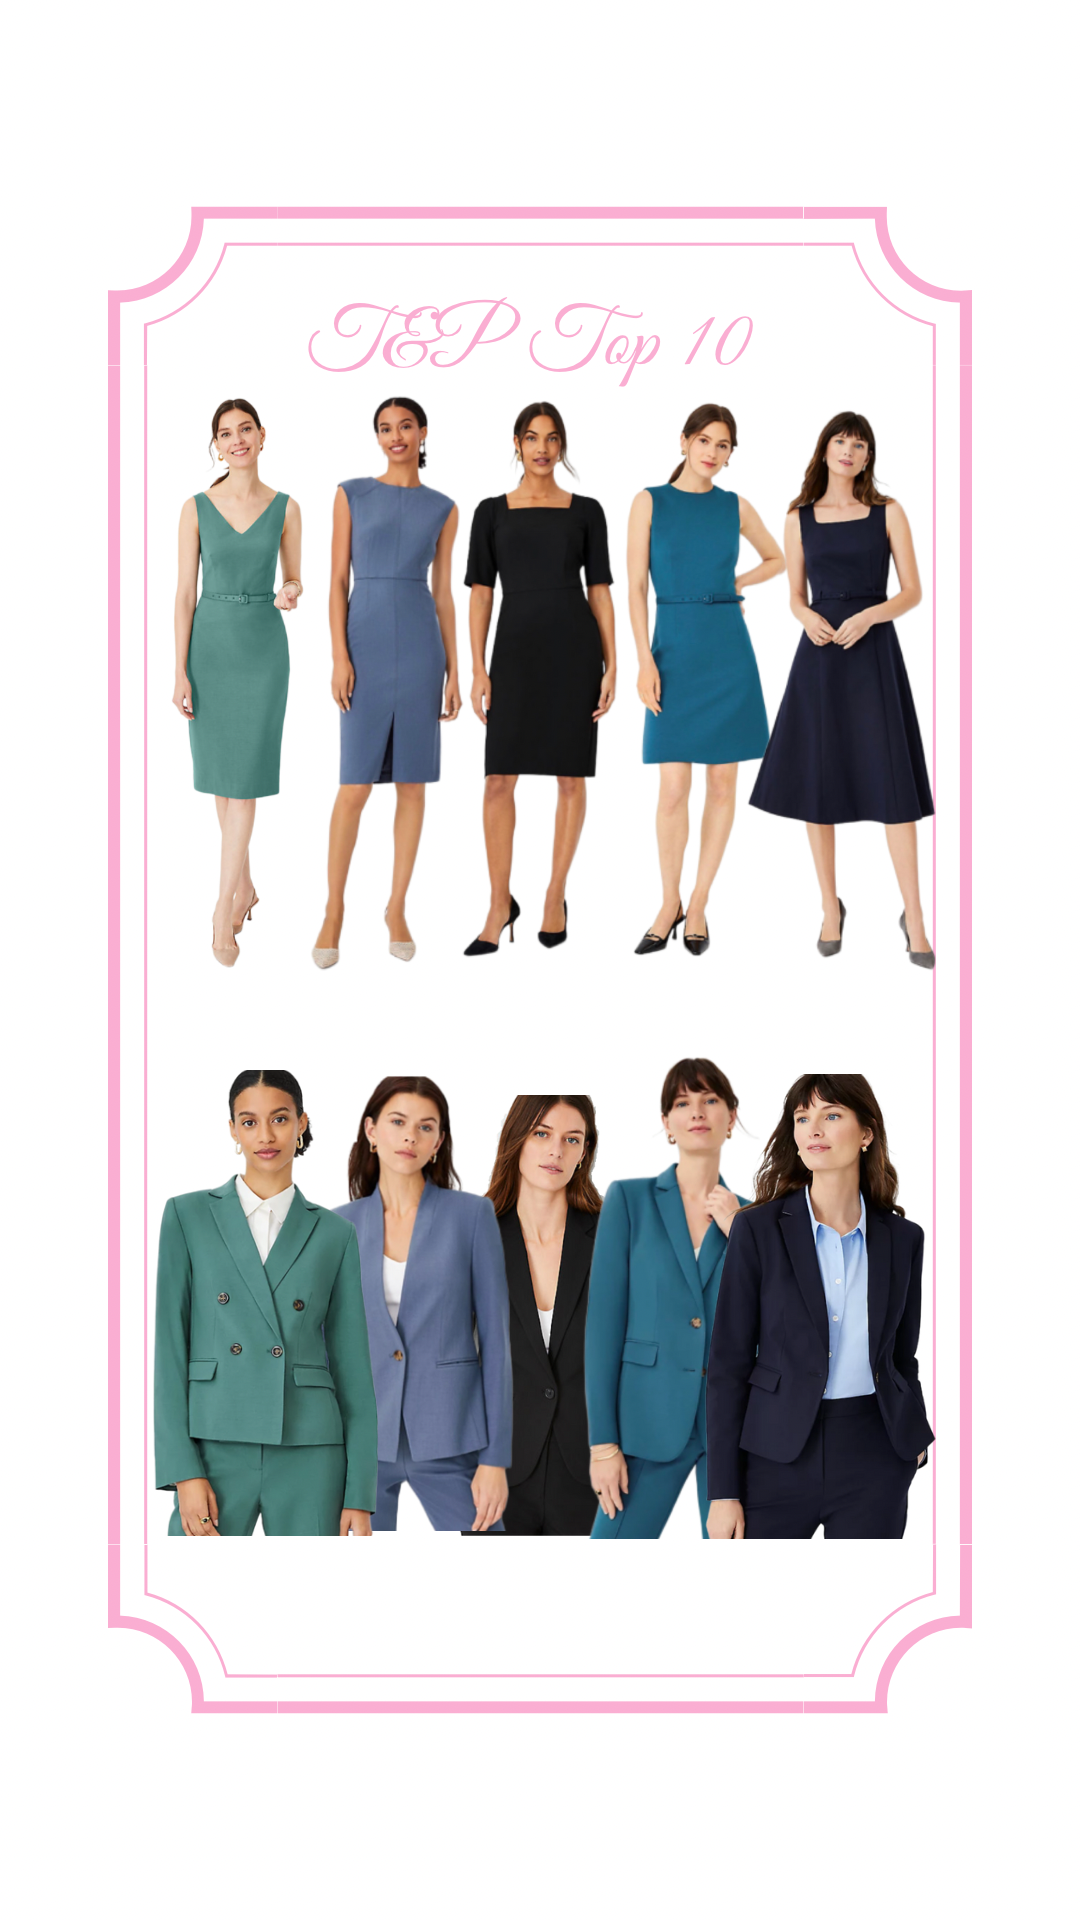 workwear, office style, office outfit, suiting, blazer, courtroom attire, belted dress, matching dress and blazer, dress suit, skirt suit, pant suit, ann taylor